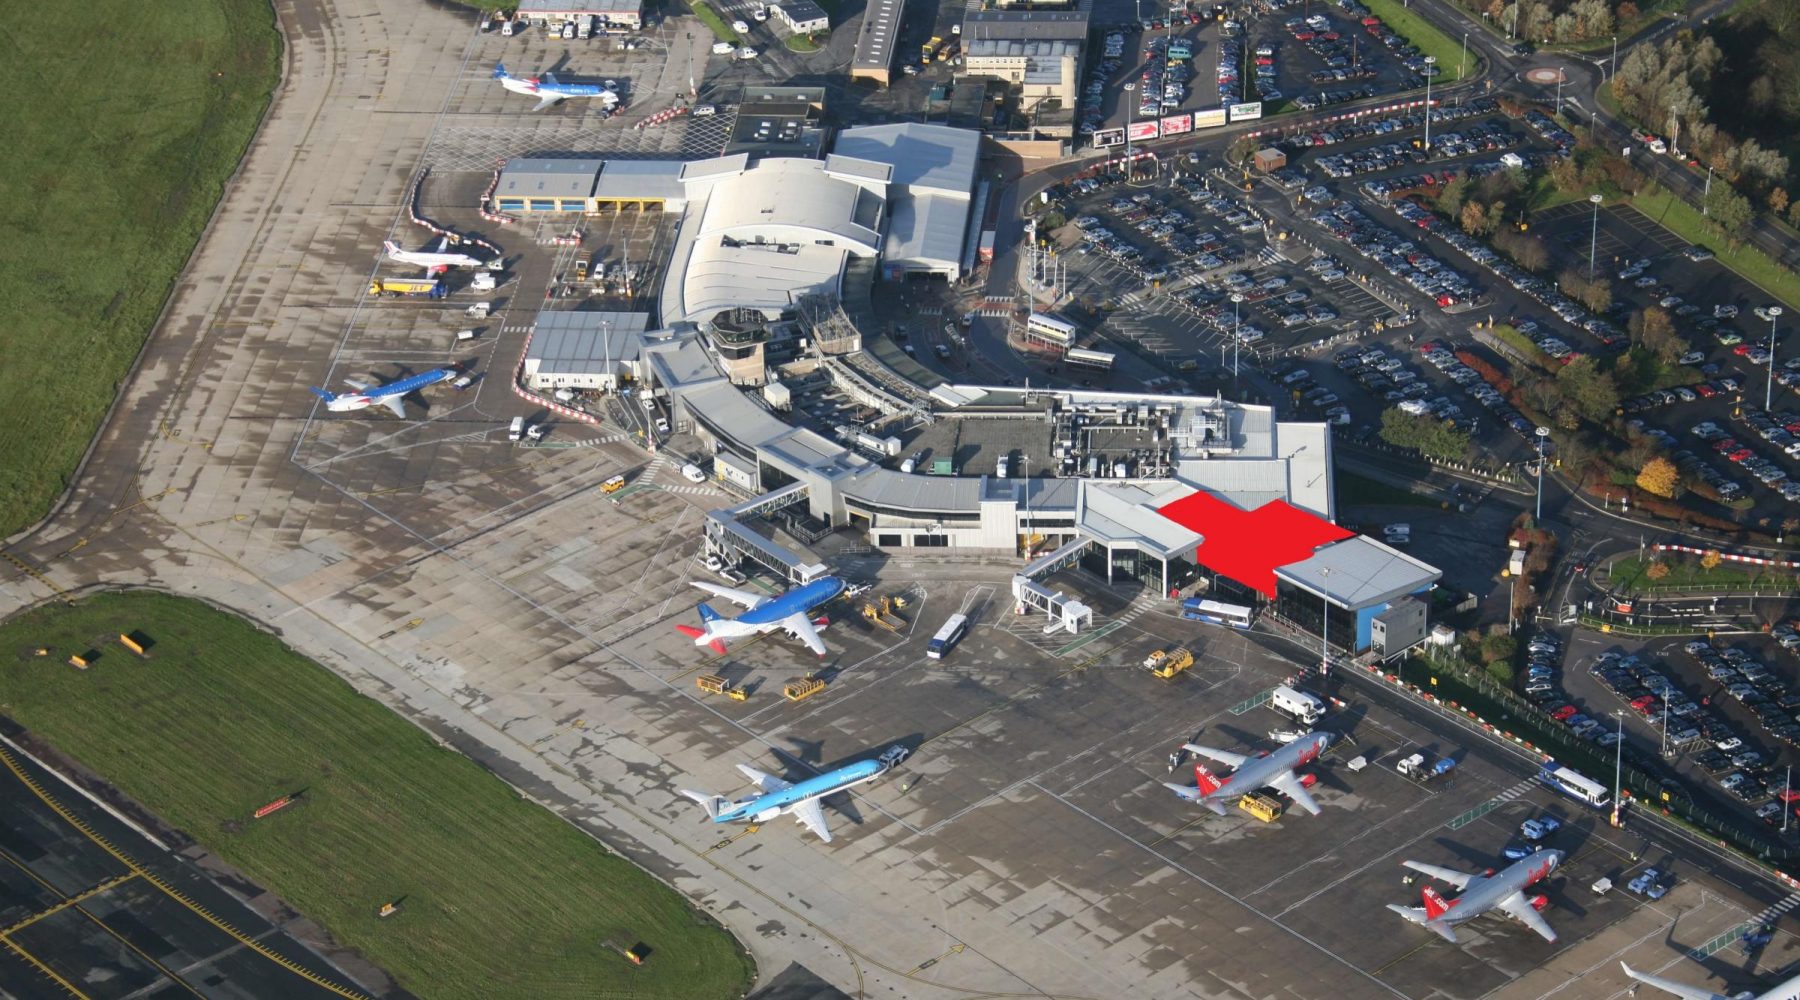 Airports like Leeds-Bradford can apply for £8 million…